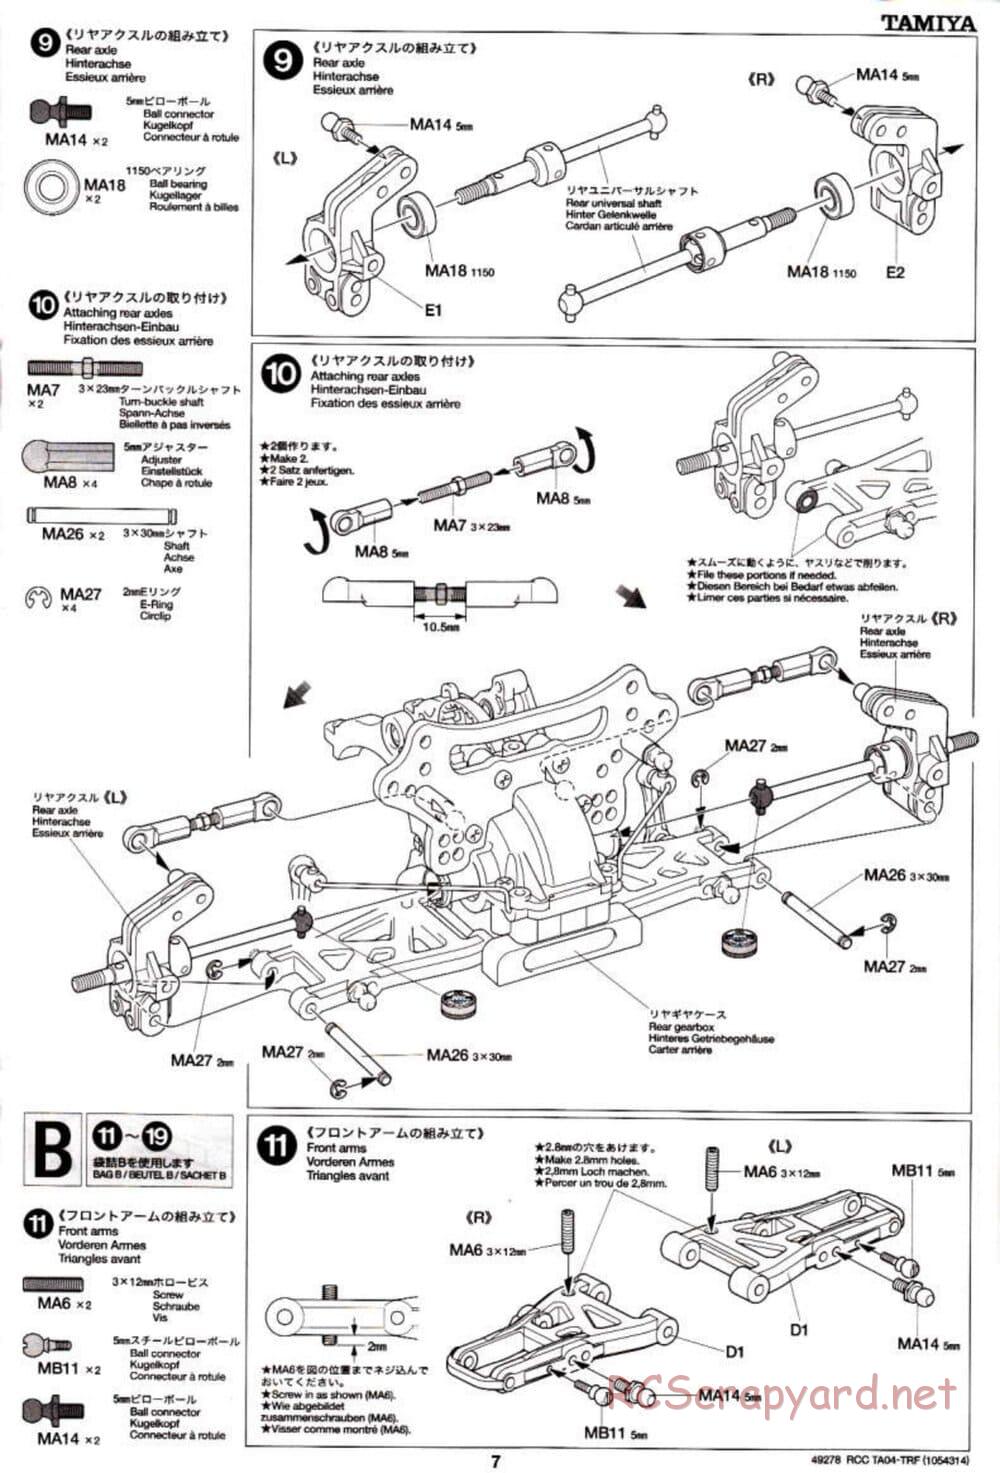 Tamiya - TA-04 TRF Special Chassis Chassis - Manual - Page 7